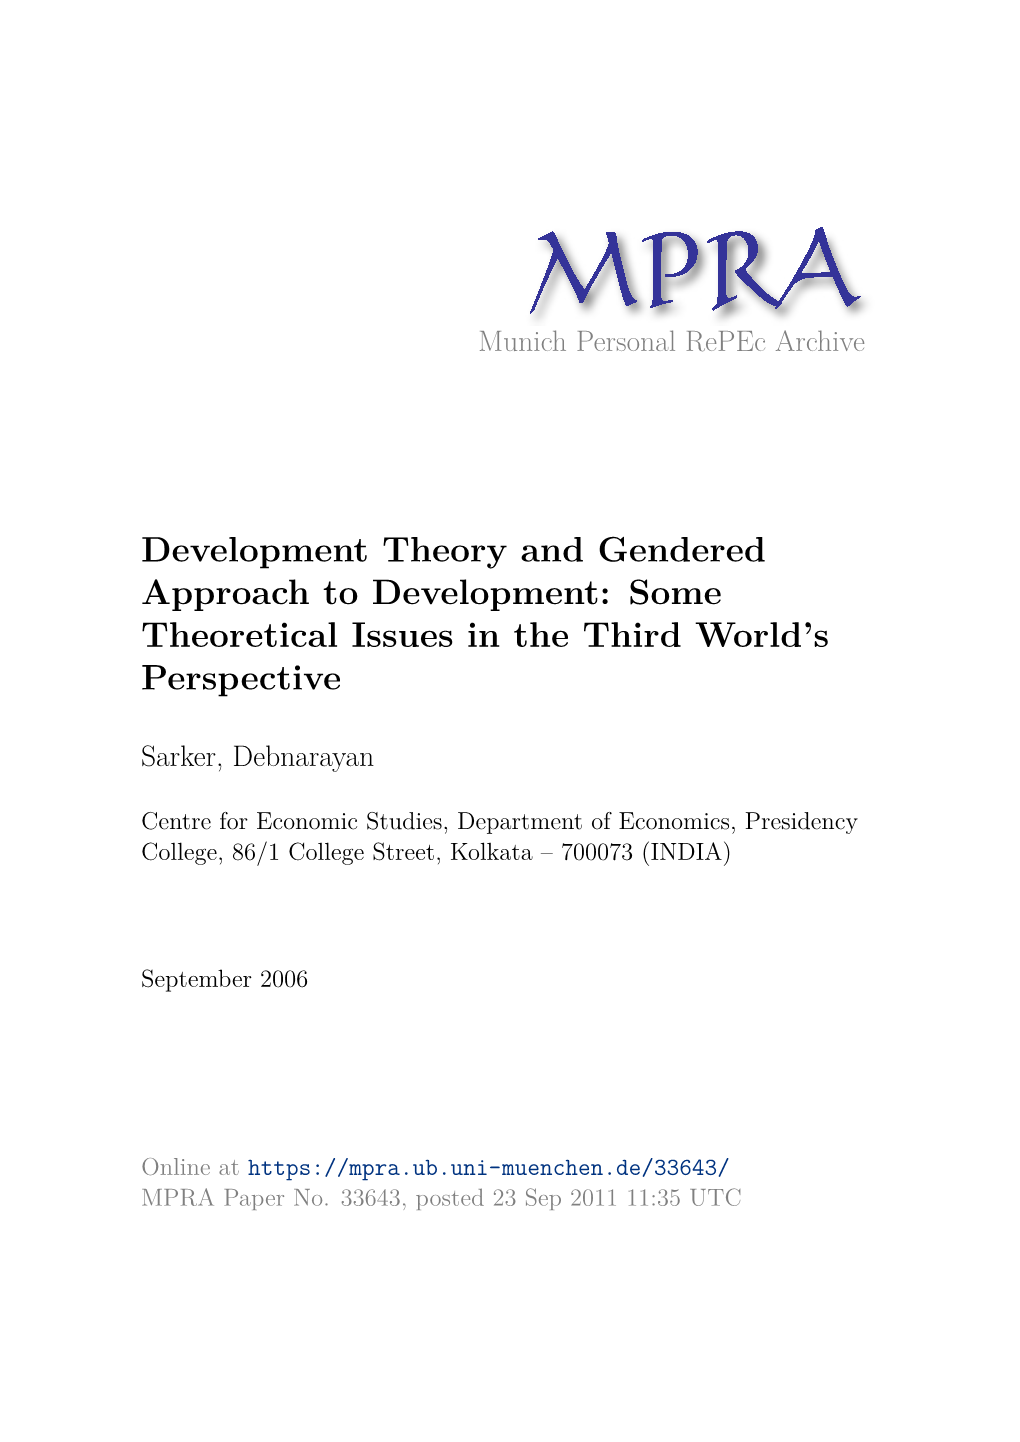 Development Theory and Gendered Approach to Development